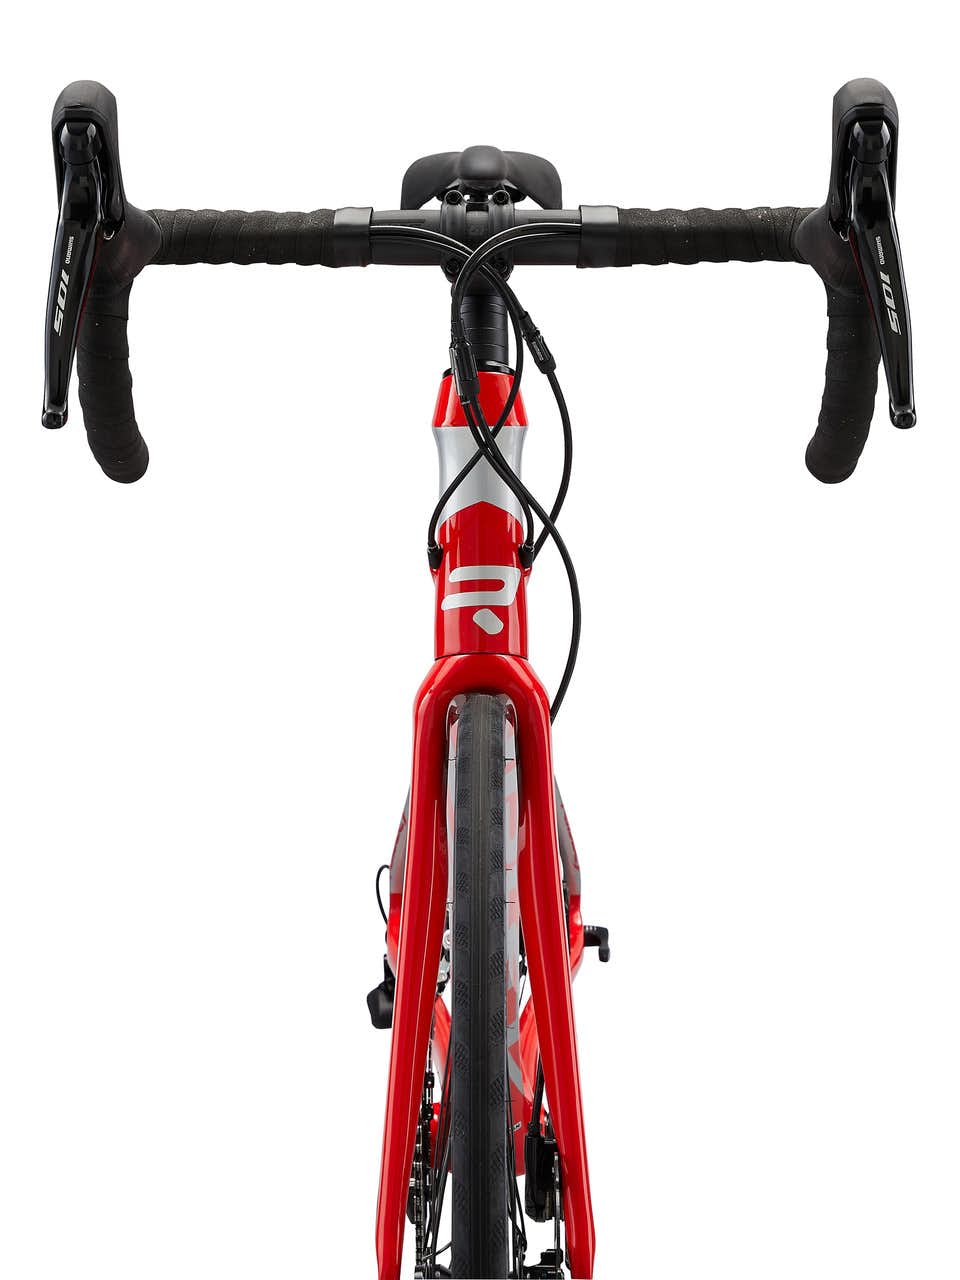 Fenix SL40 Disc 105 Mix Bicycle Silver/Red